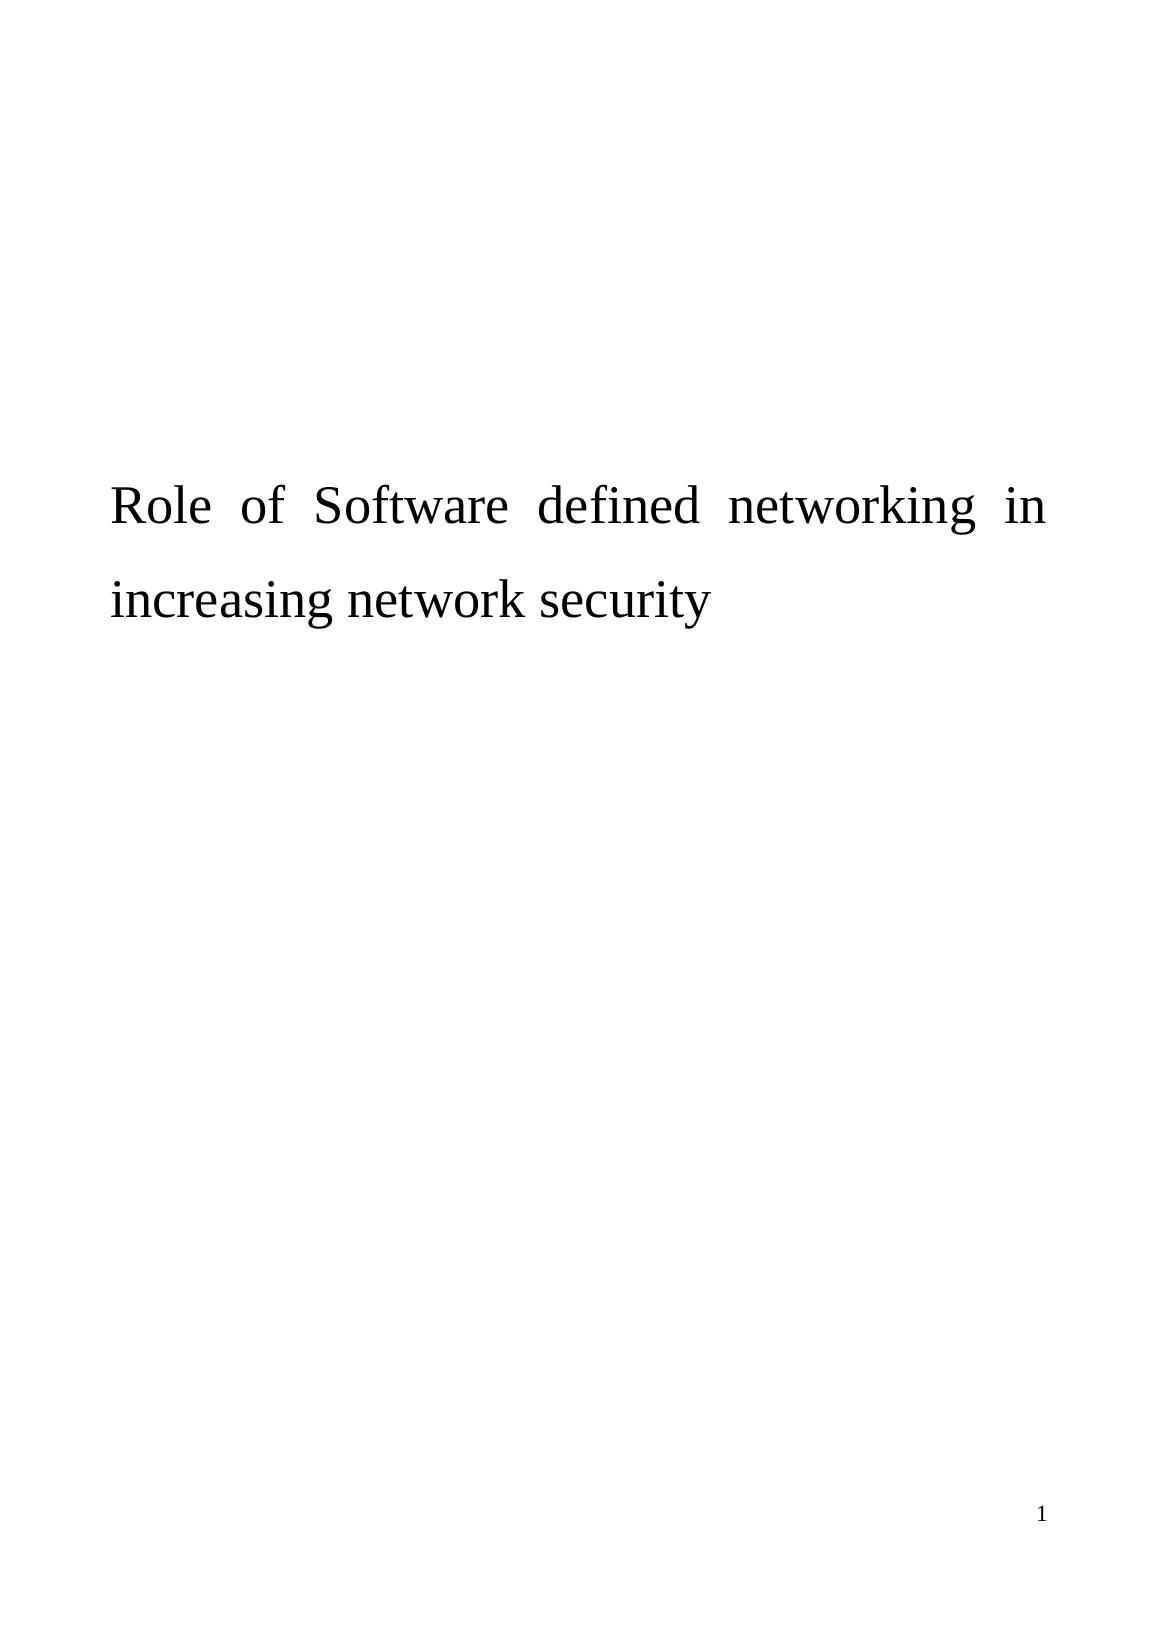 Role of Software Defined Networking in Increasing Network Security_1